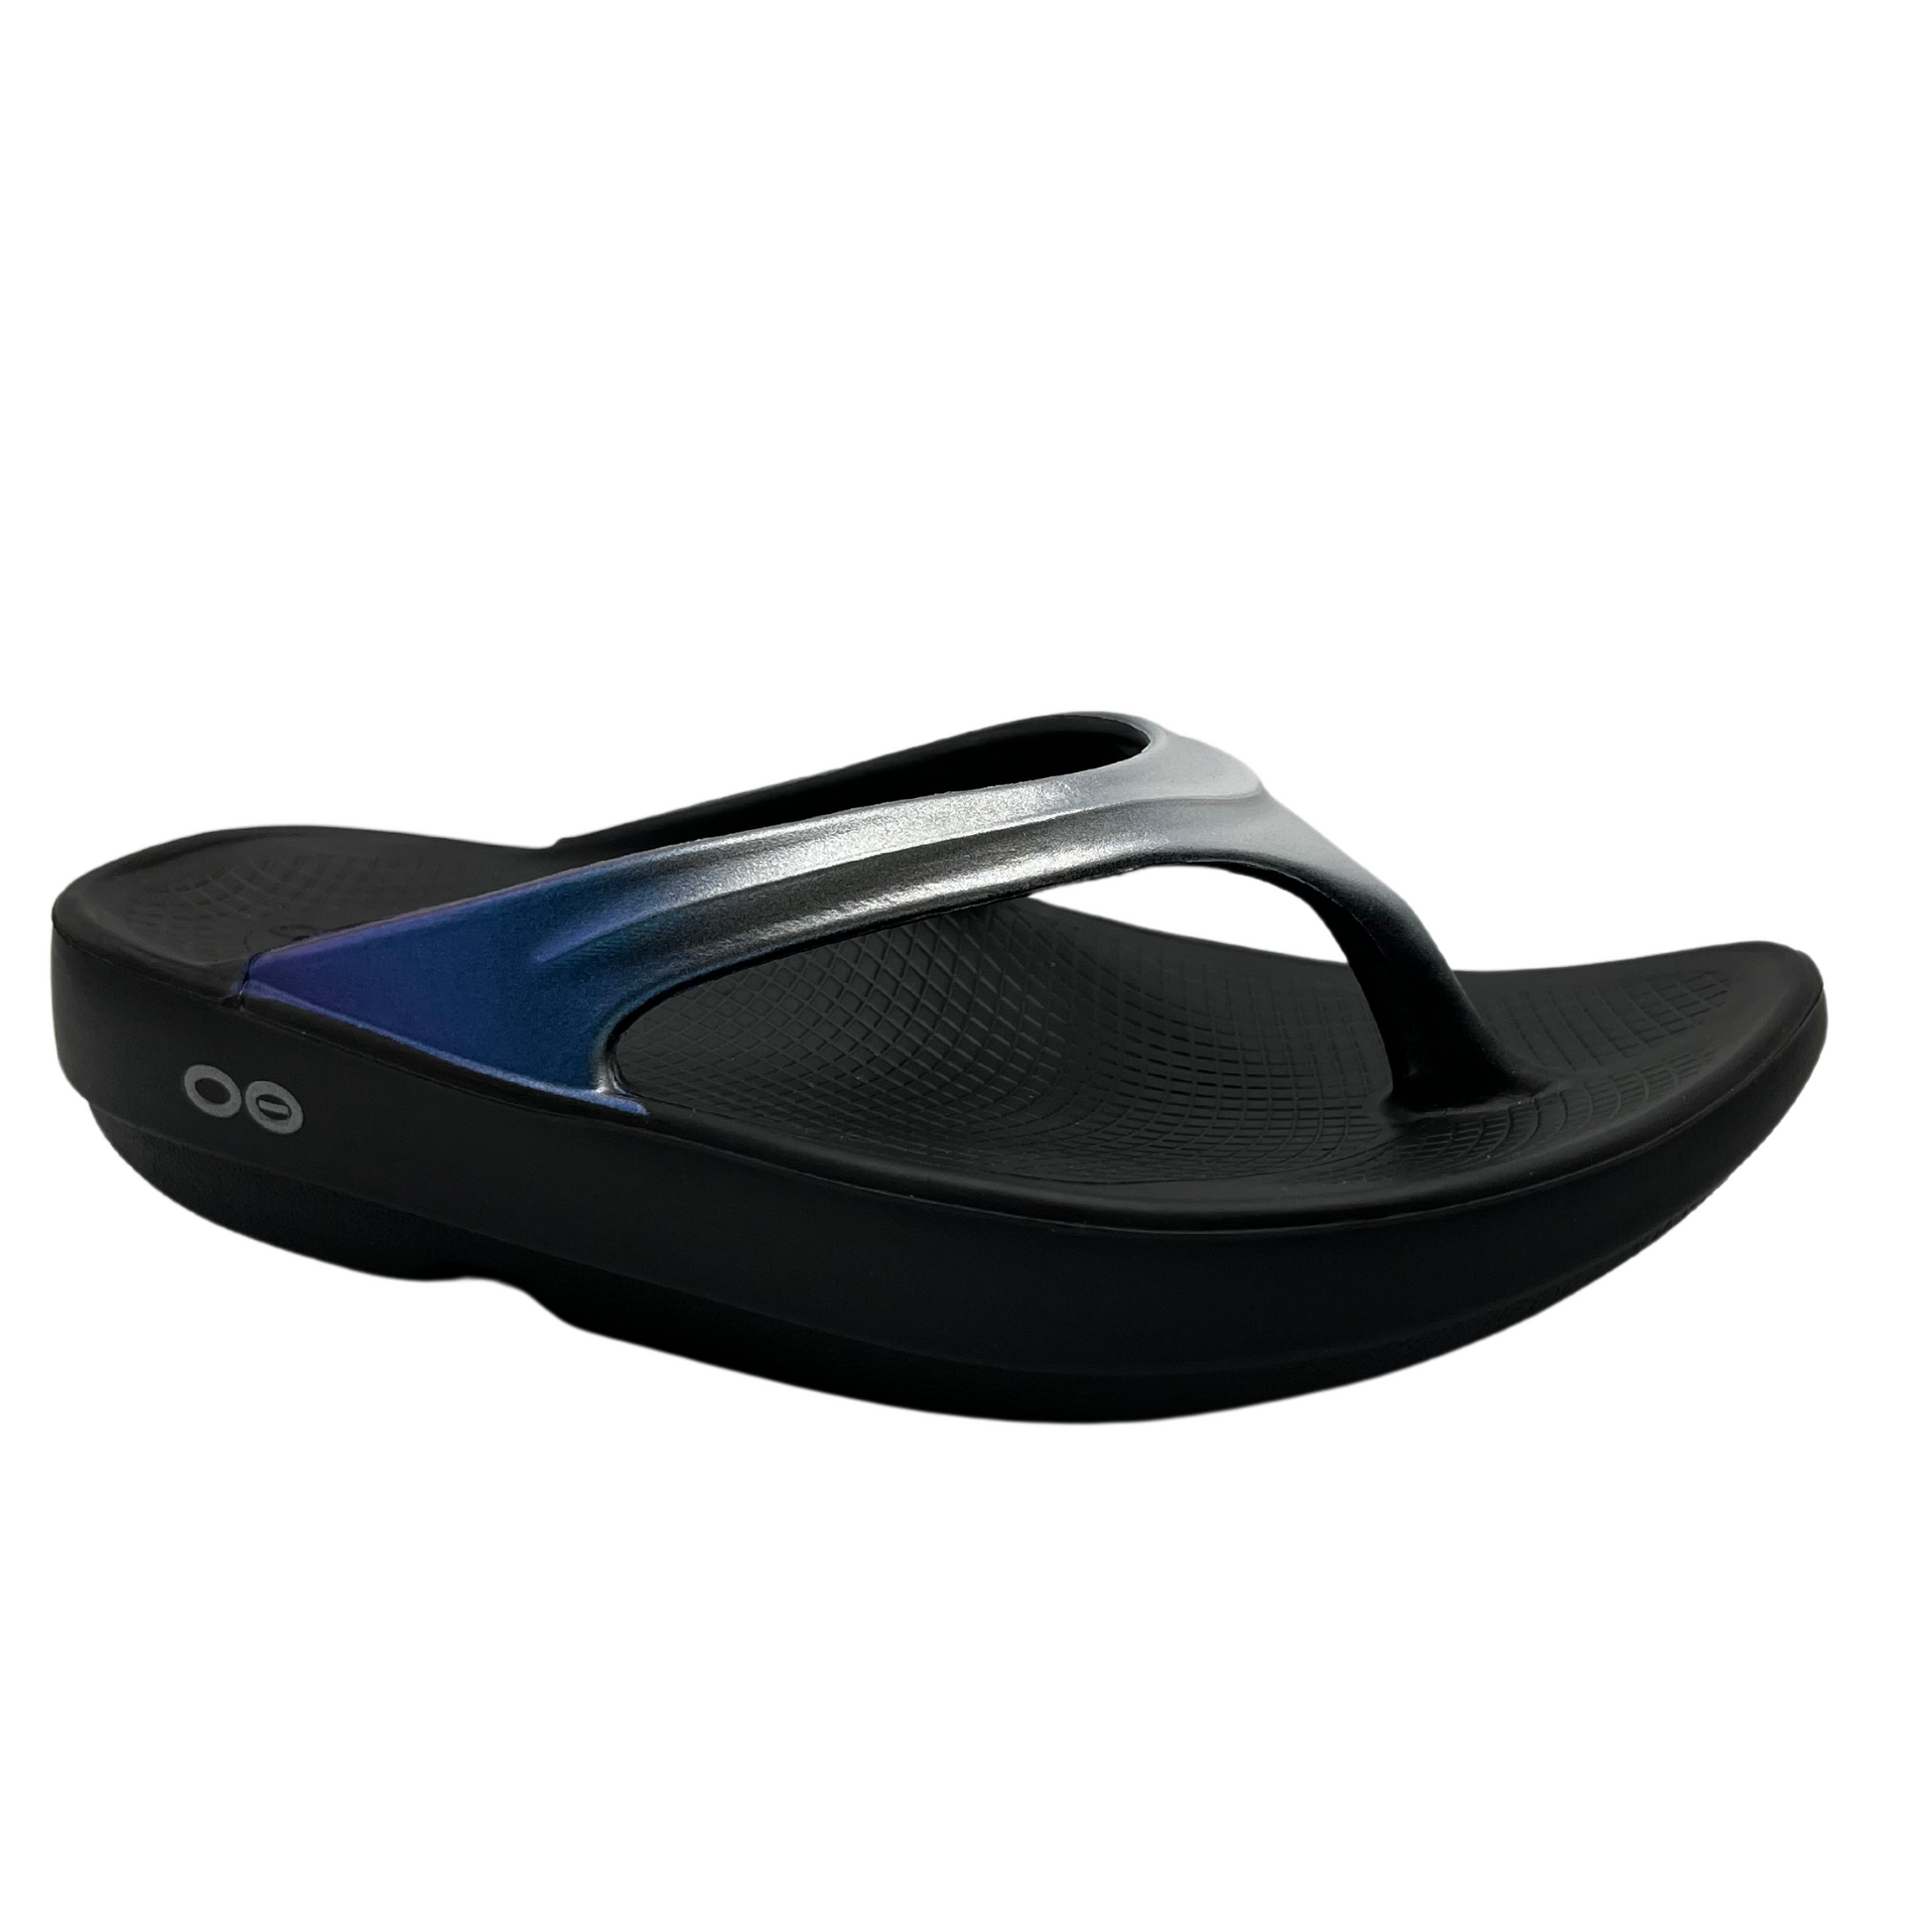 45 degree angled view of foam, thong strapped sandals with iridescent finish on straps 